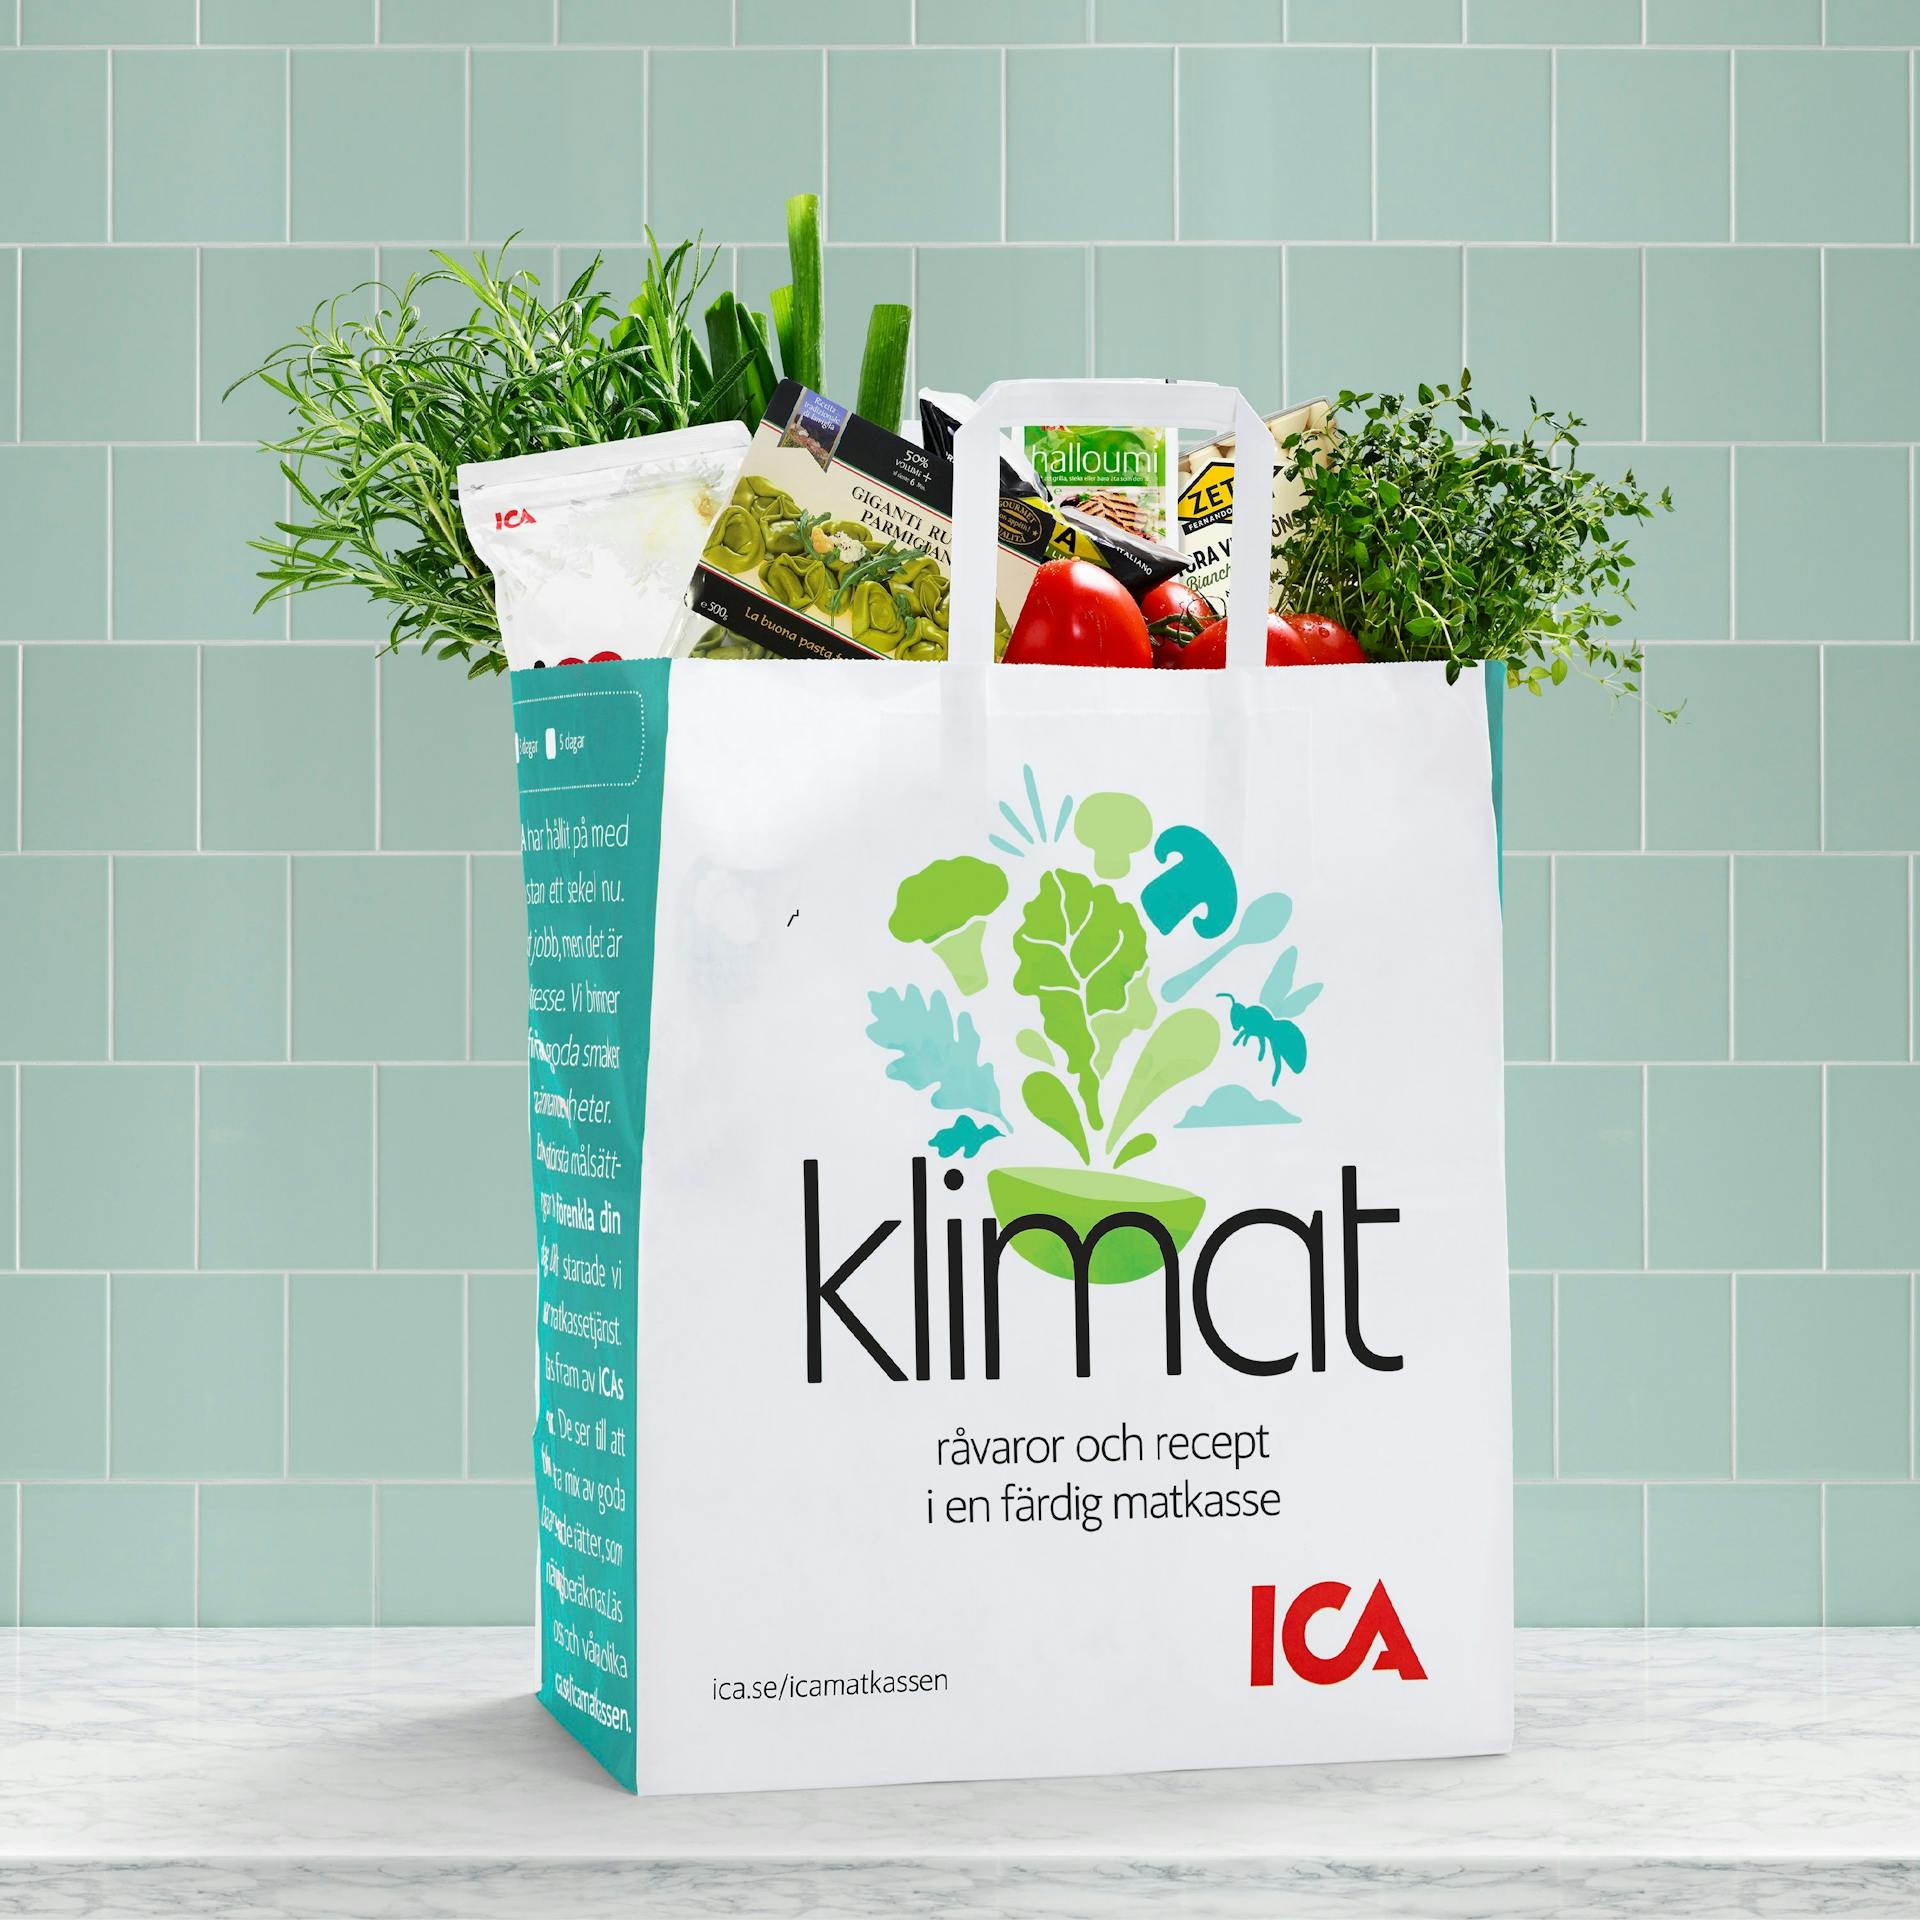 ICA's climate-friendly bag is packed with vegetables and other goods